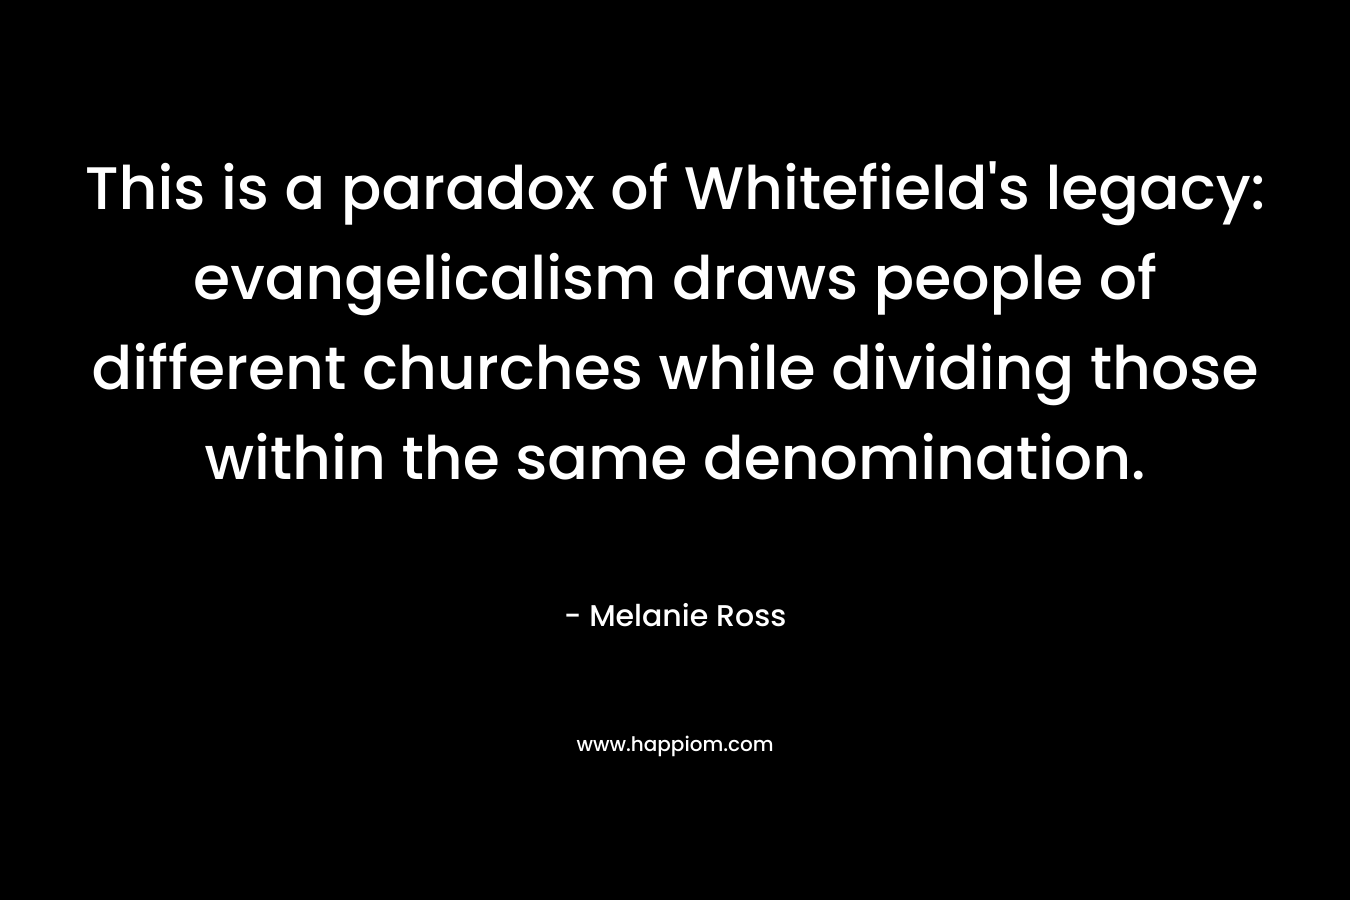 This is a paradox of Whitefield's legacy: evangelicalism draws people of different churches while dividing those within the same denomination.